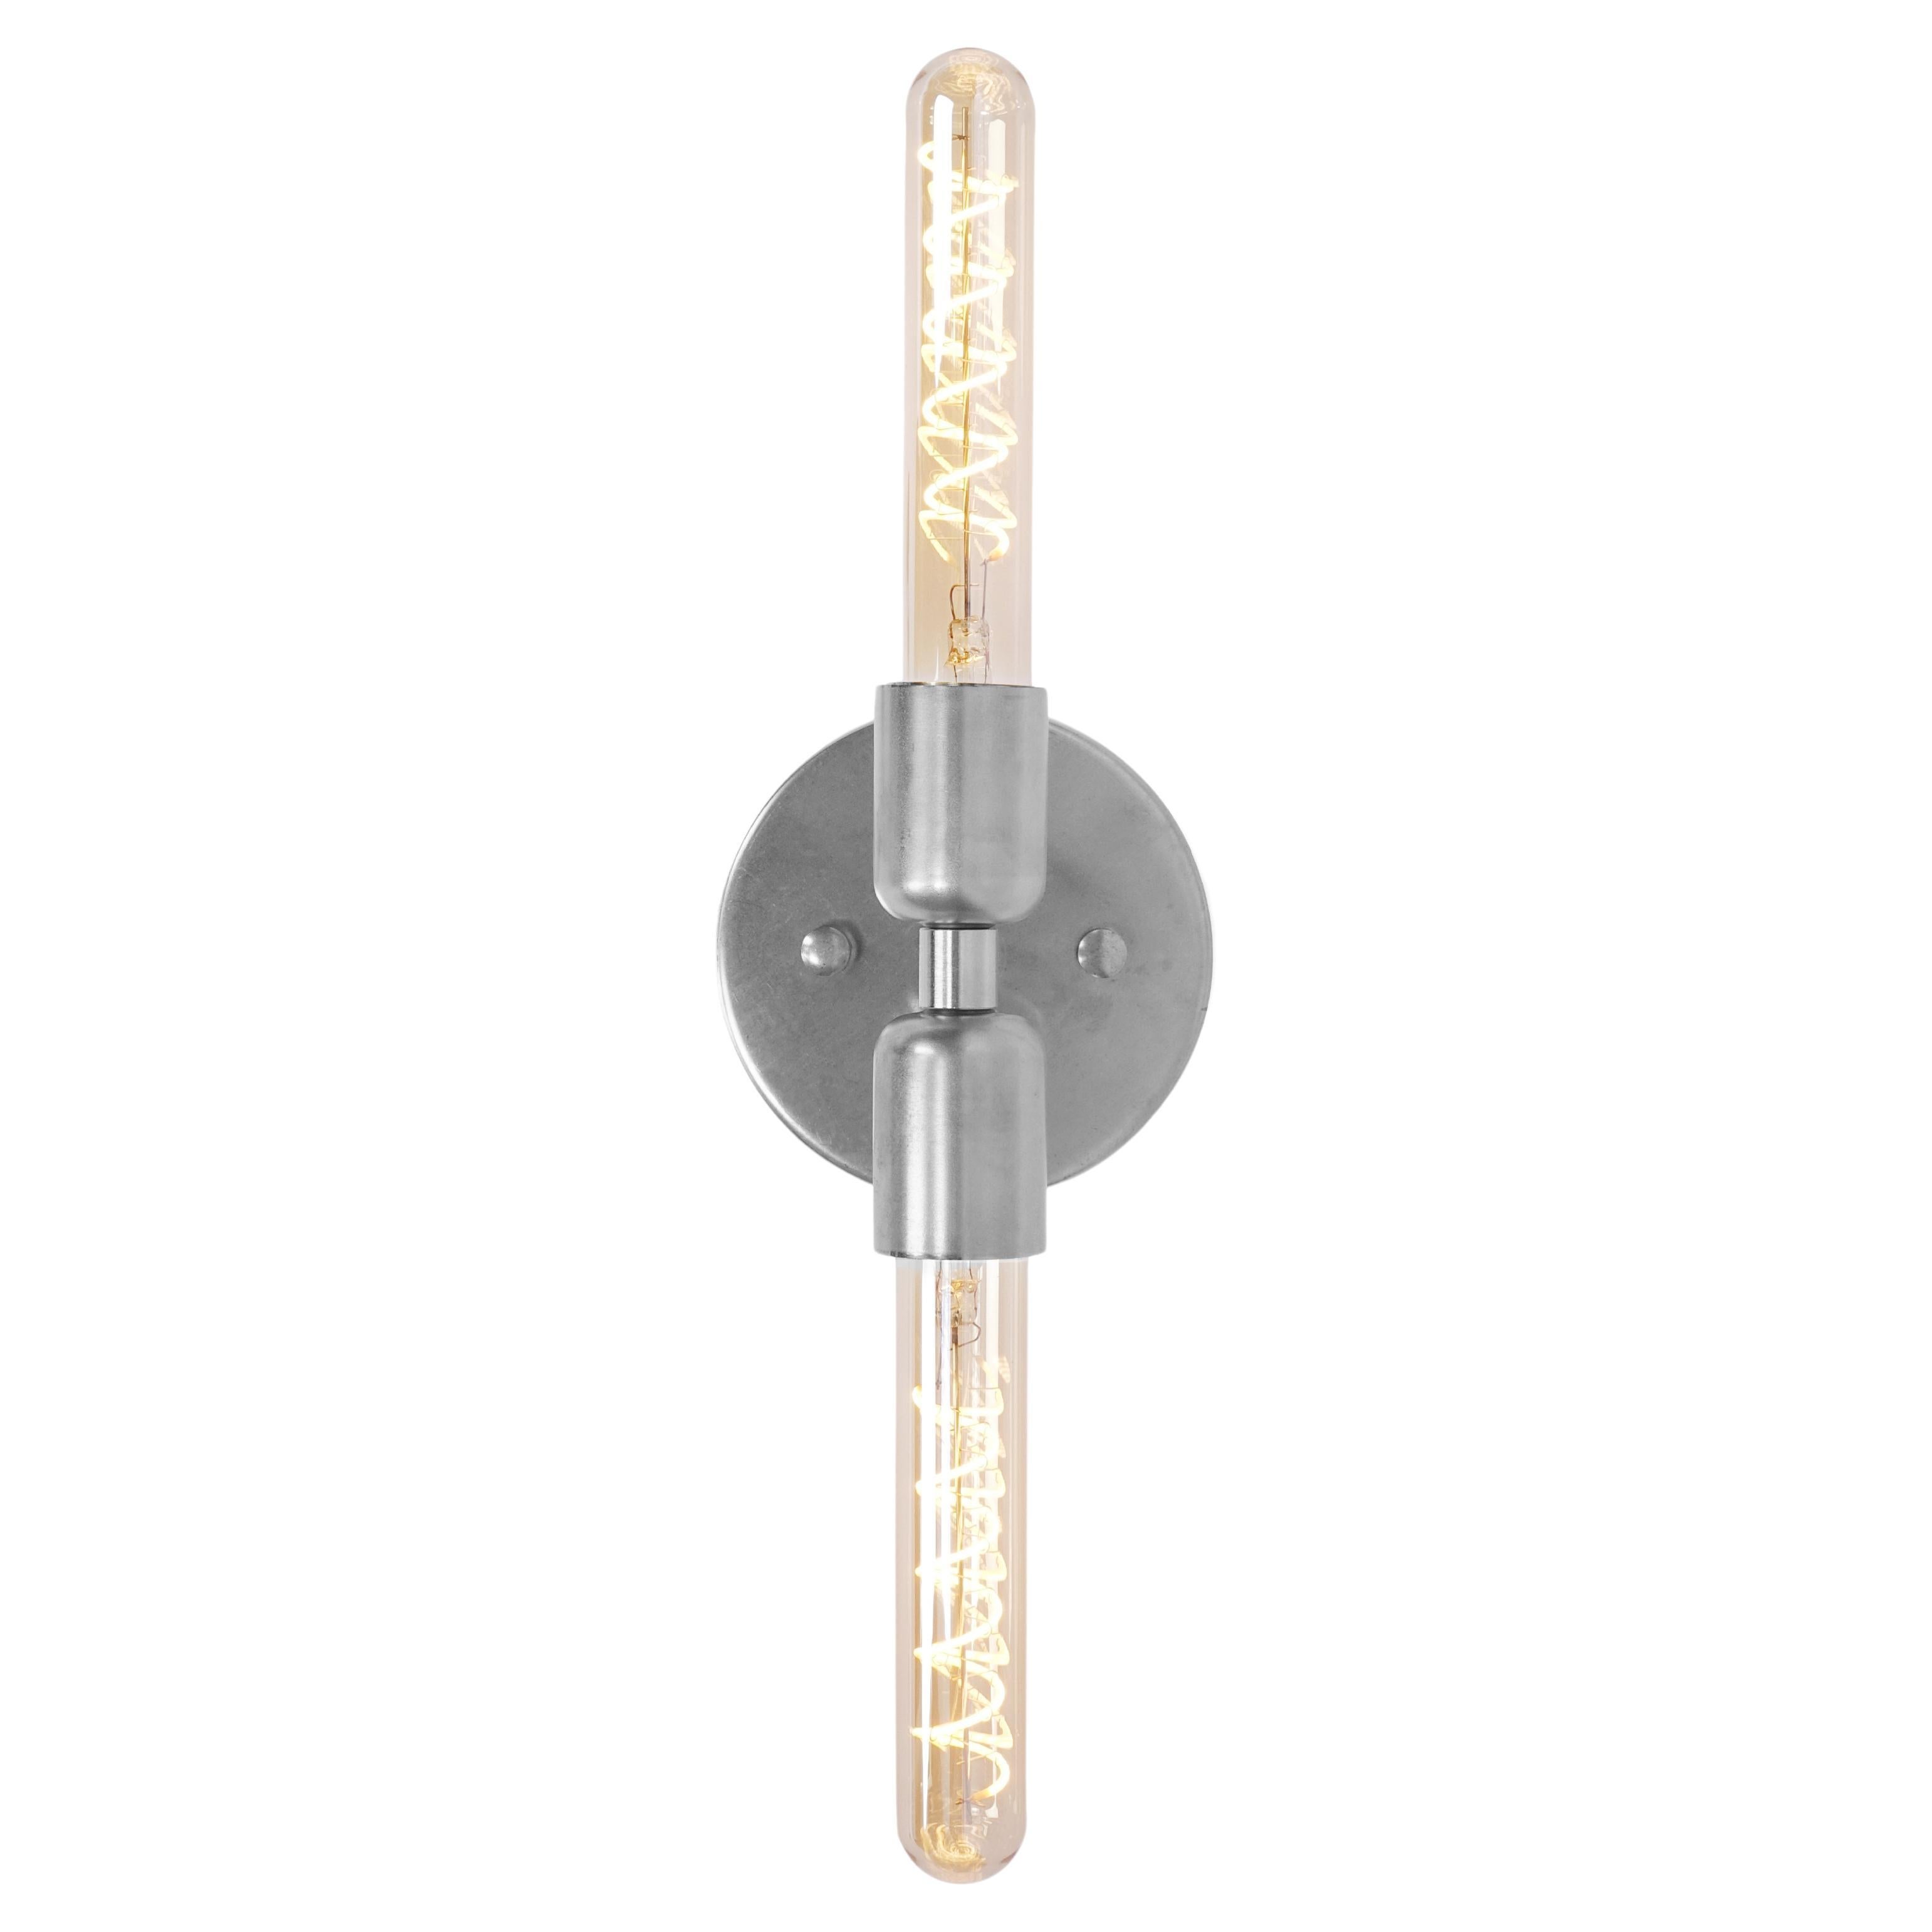 Two Way Sconce Light Nickel For Sale